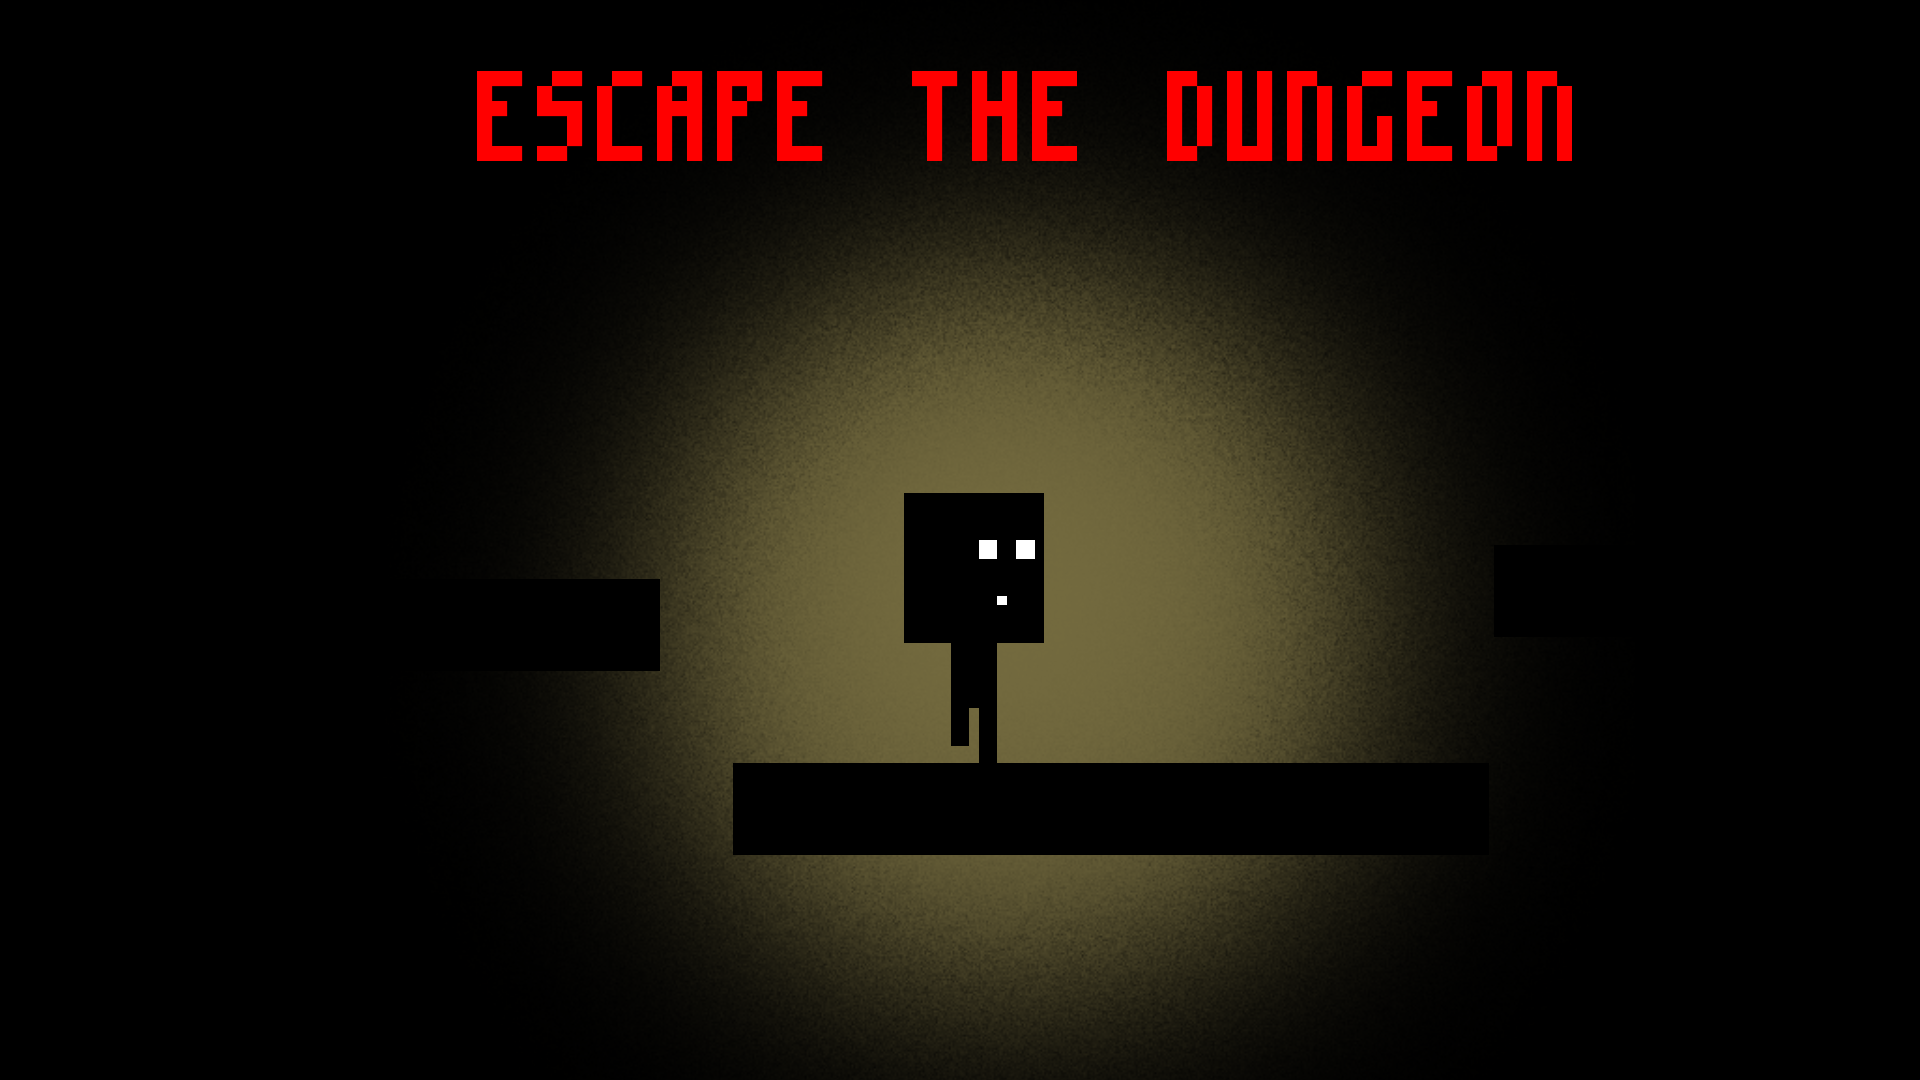 Escape The Dungeon